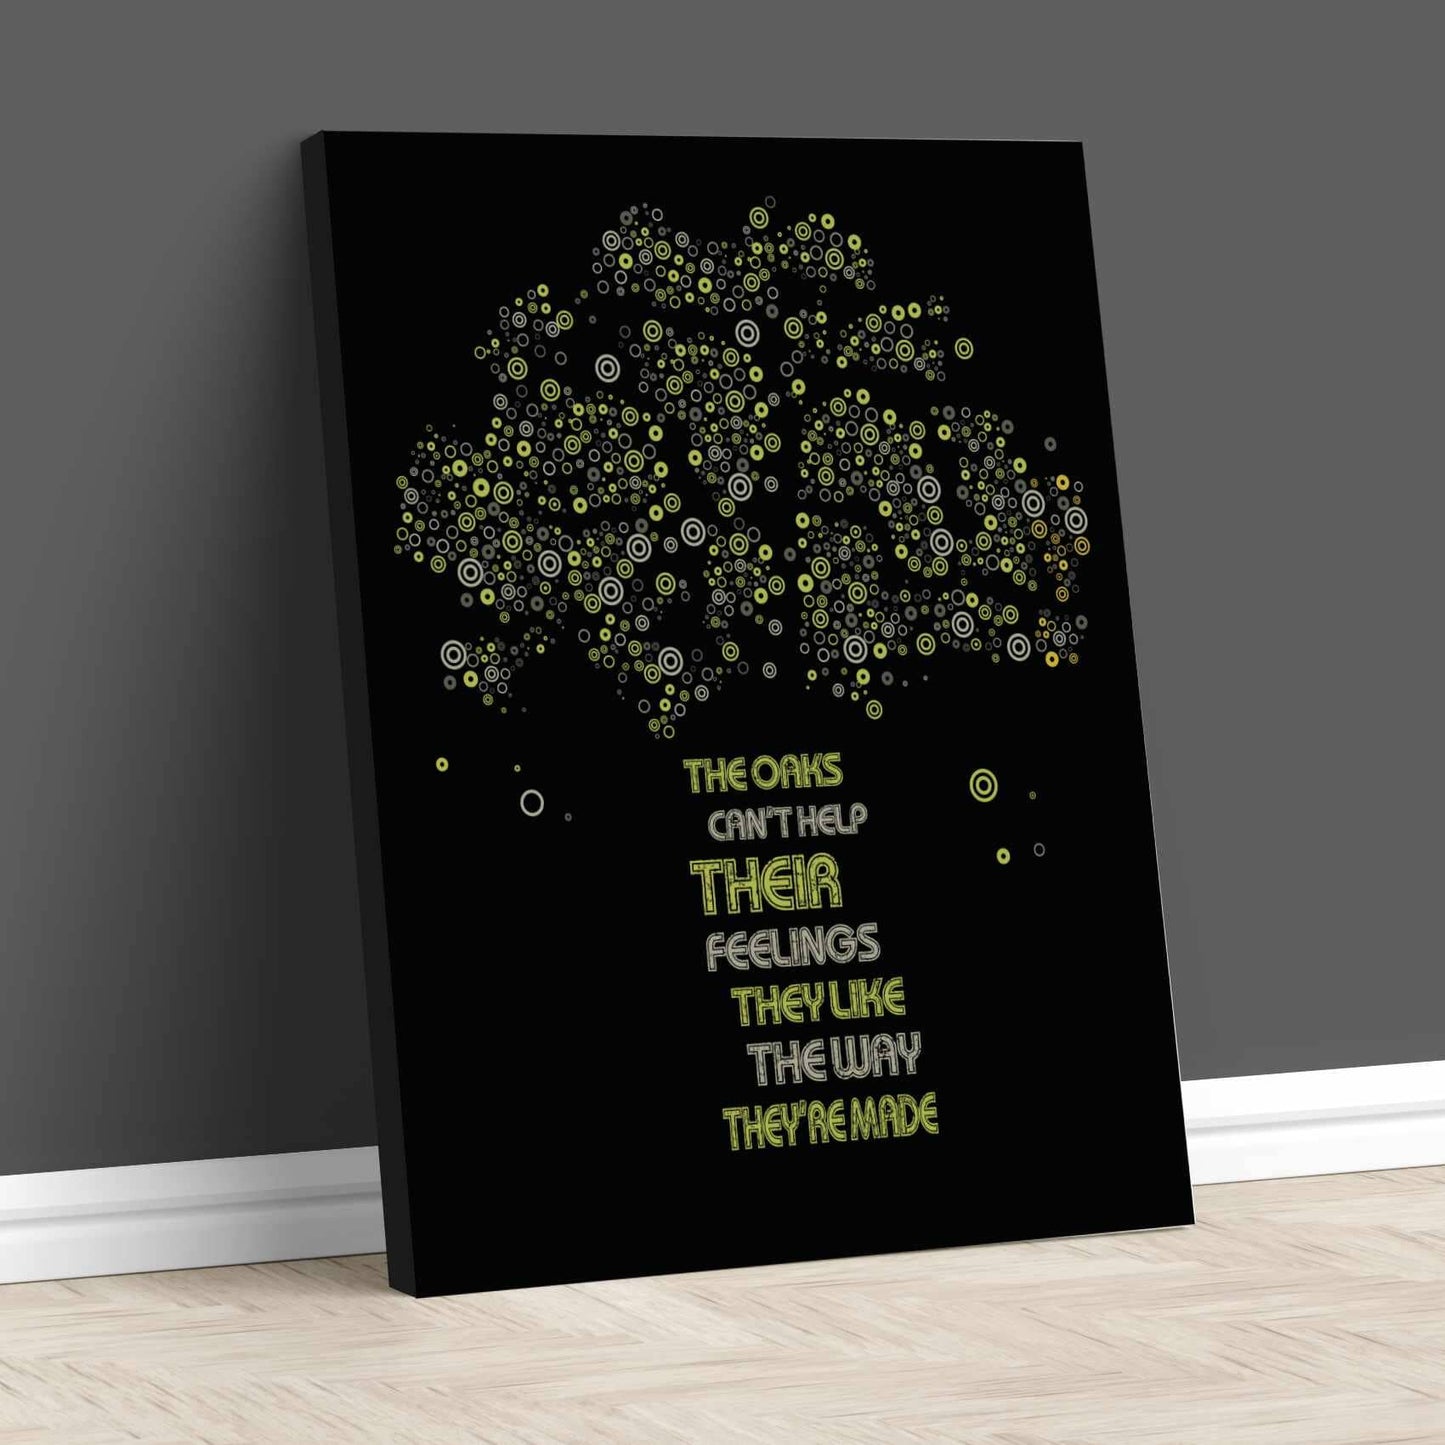 The Trees by Rush - Lyric Inspired Song Art Rock Music Print Song Lyrics Art Song Lyrics Art 11x14 Canvas Wrap 